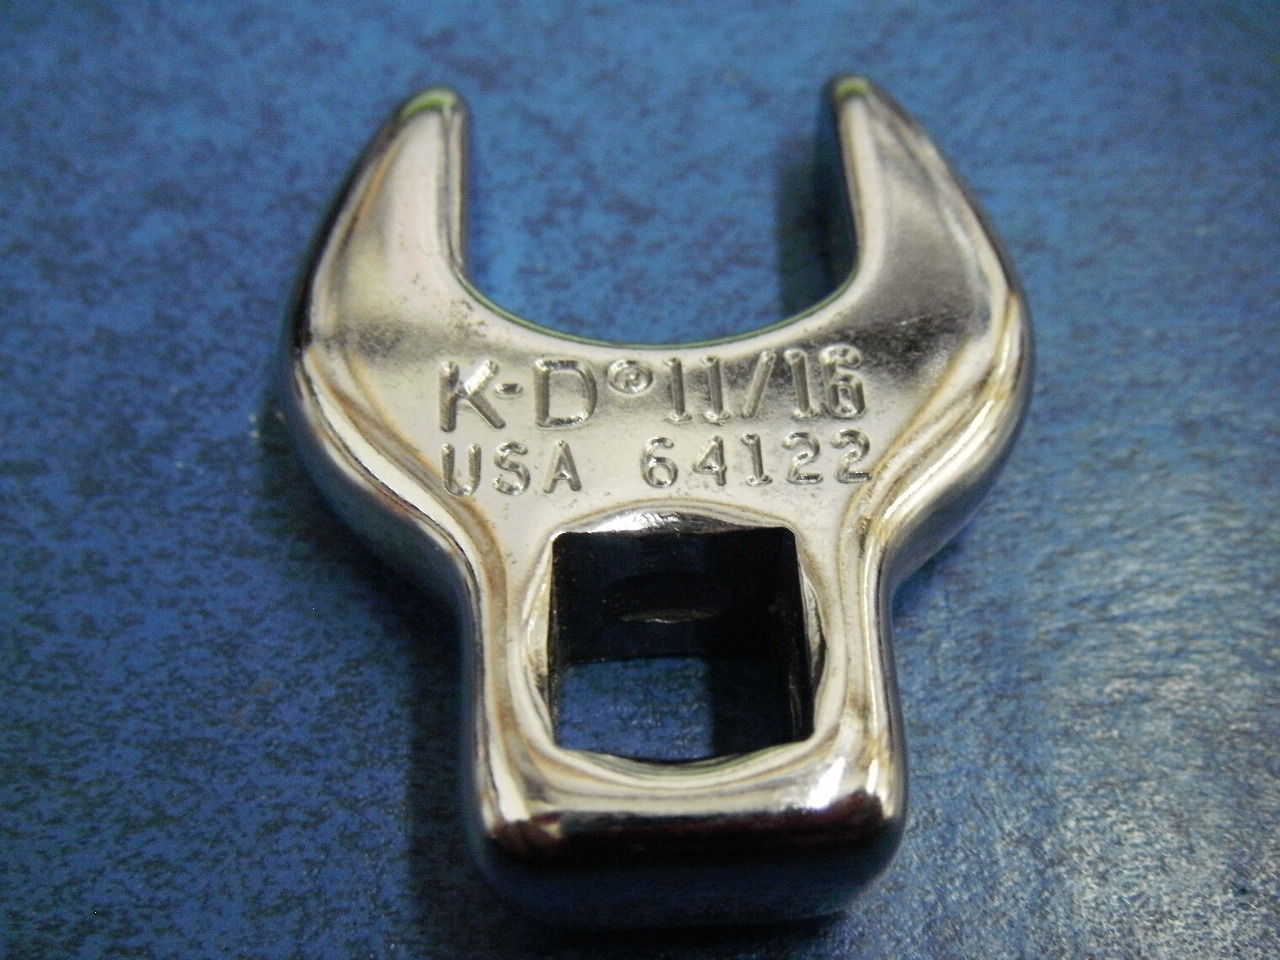 KD Tools 64122 Ratcheting 3/8" Drive 11/16" Crowfoot Wrench USA